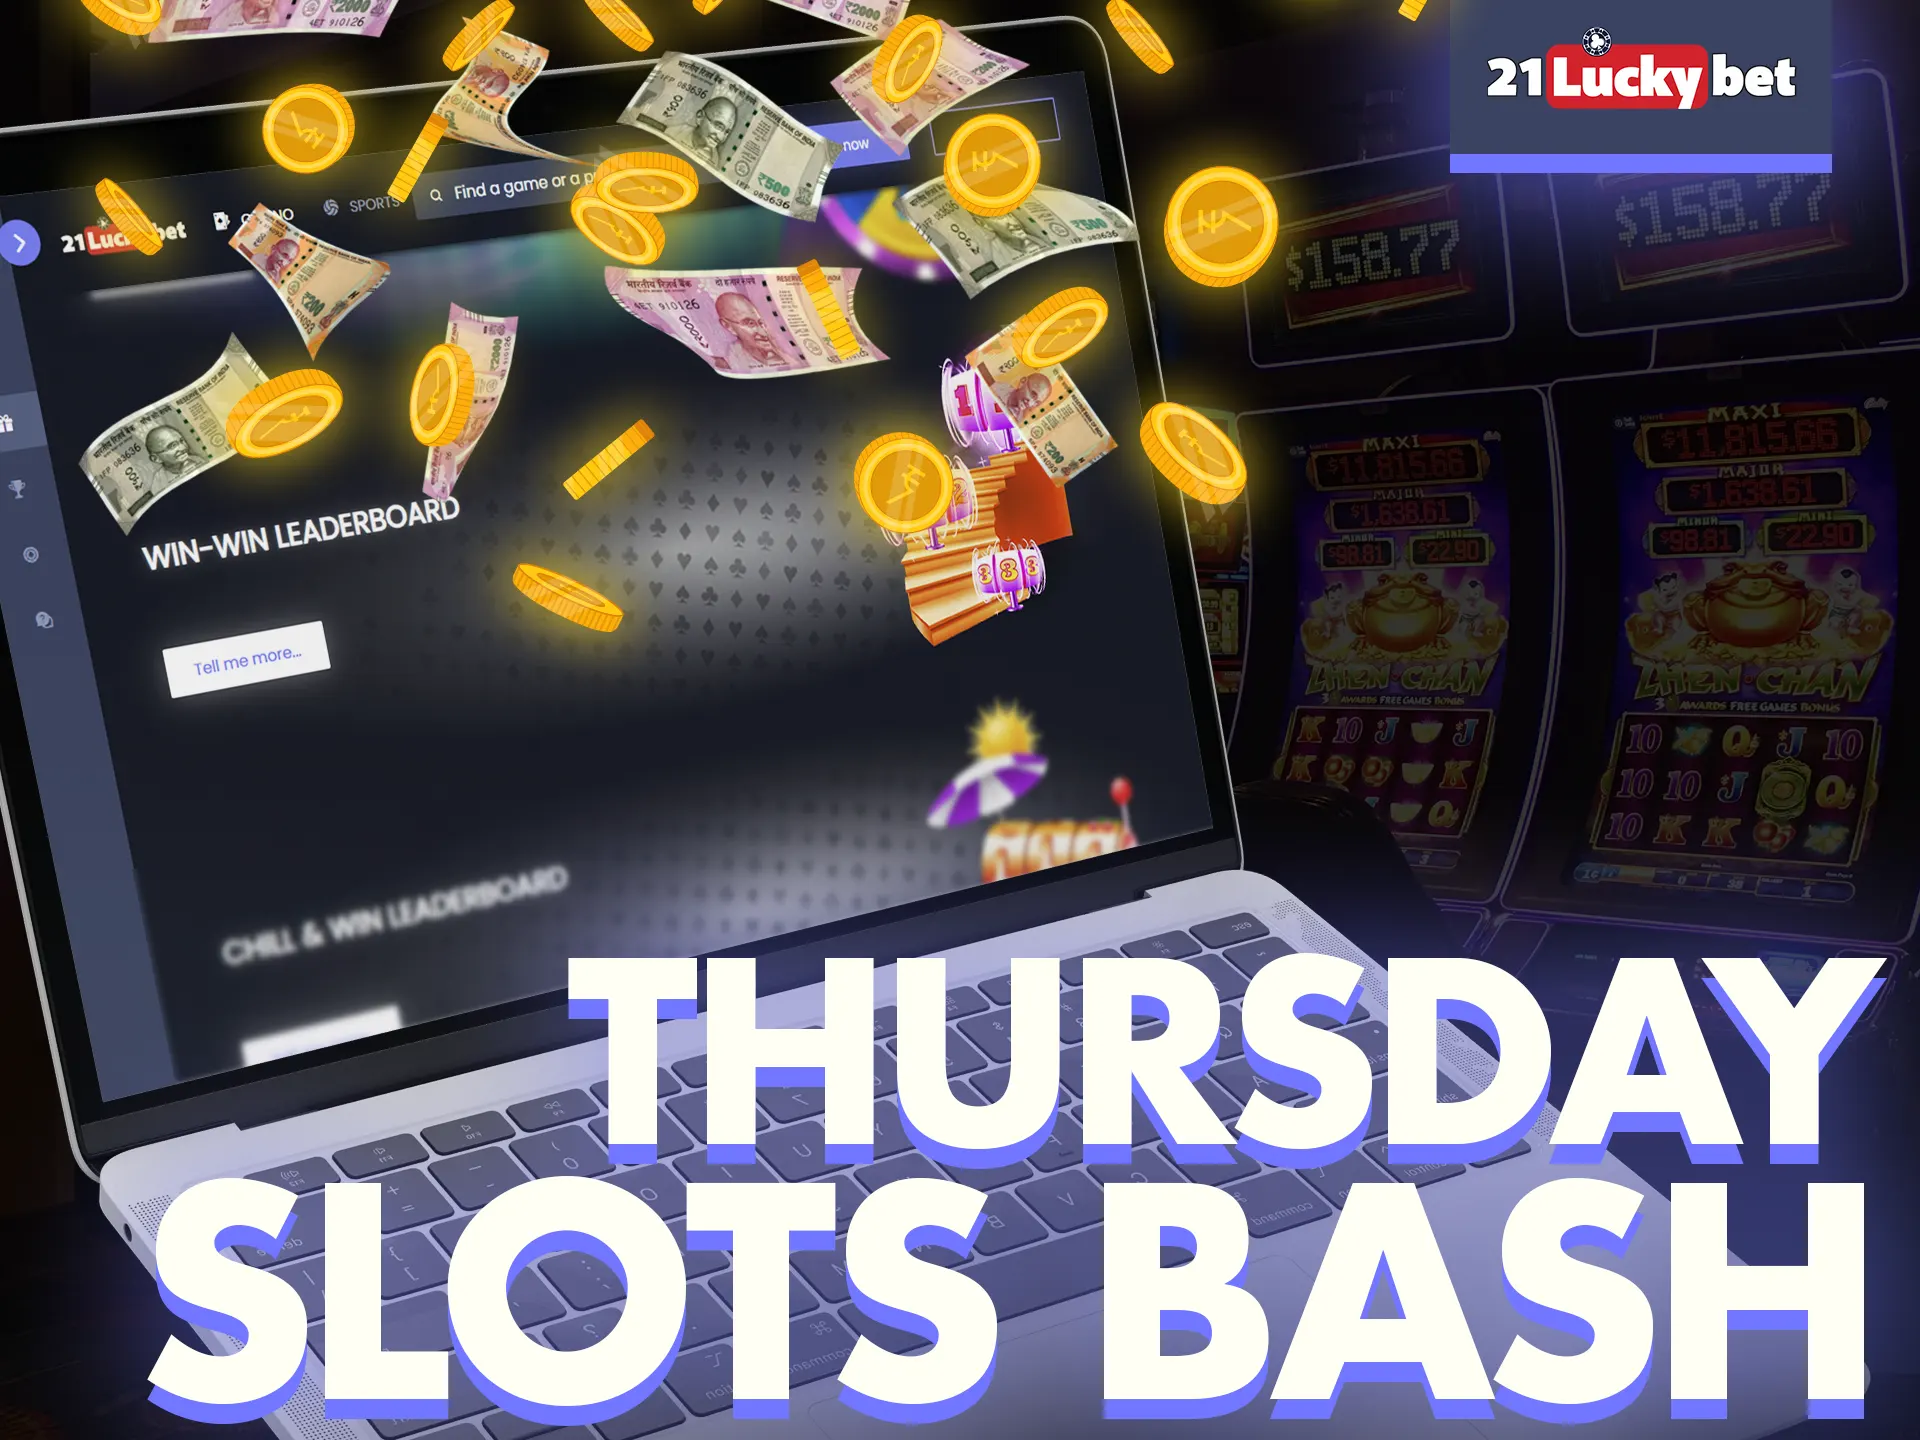 Try 21luckybet slots bash every Thursday.